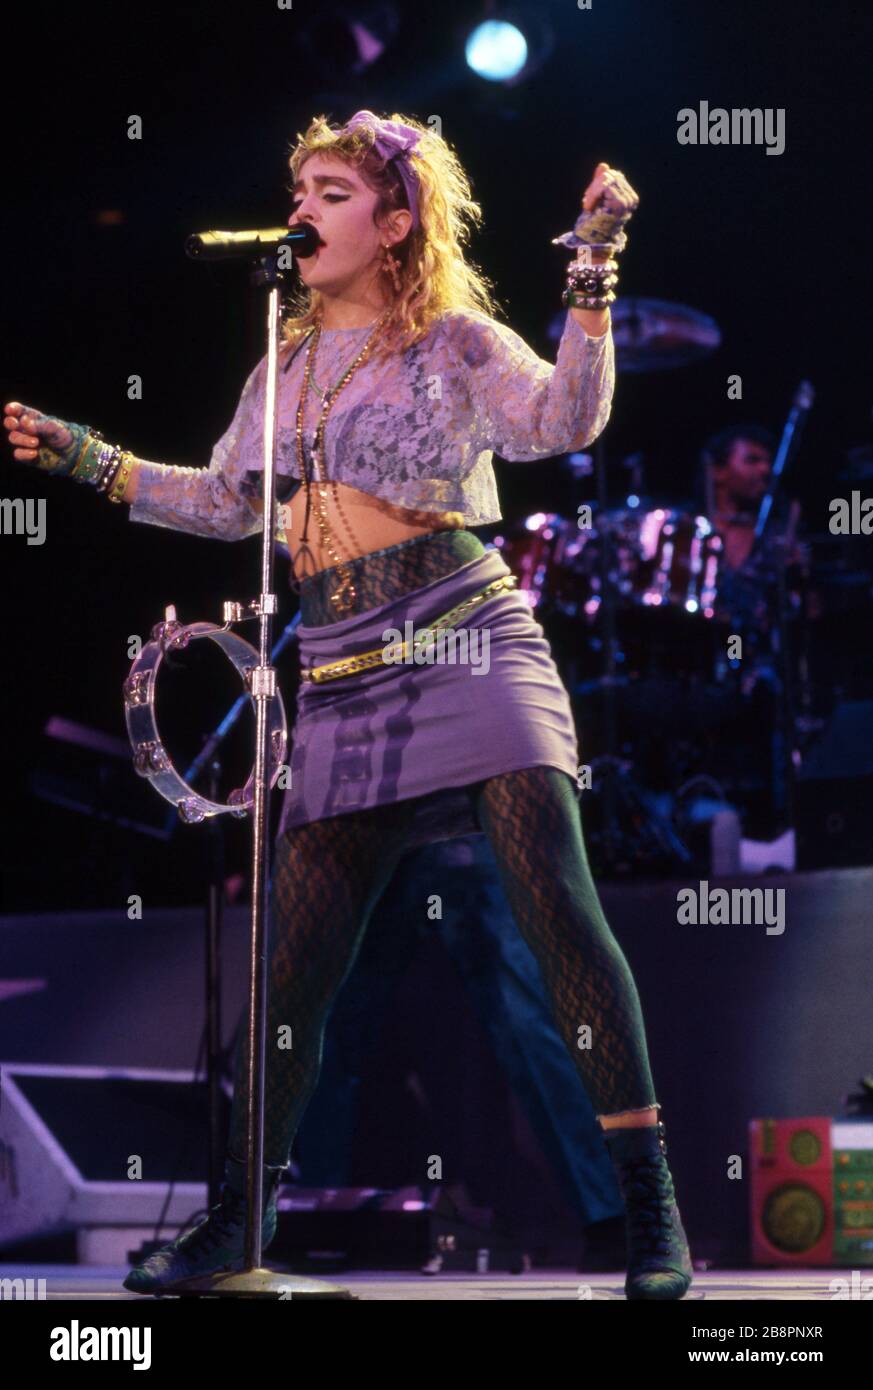 DETROIT - MAY 25: American, singer, songwriter and actress, Madonna, on stage during the 'Virgin Tour' on May 25, 1985, at Cobo Arena in Detroit, Michigan.  Credit: Ross Marino Archive / MediaPunch Stock Photo